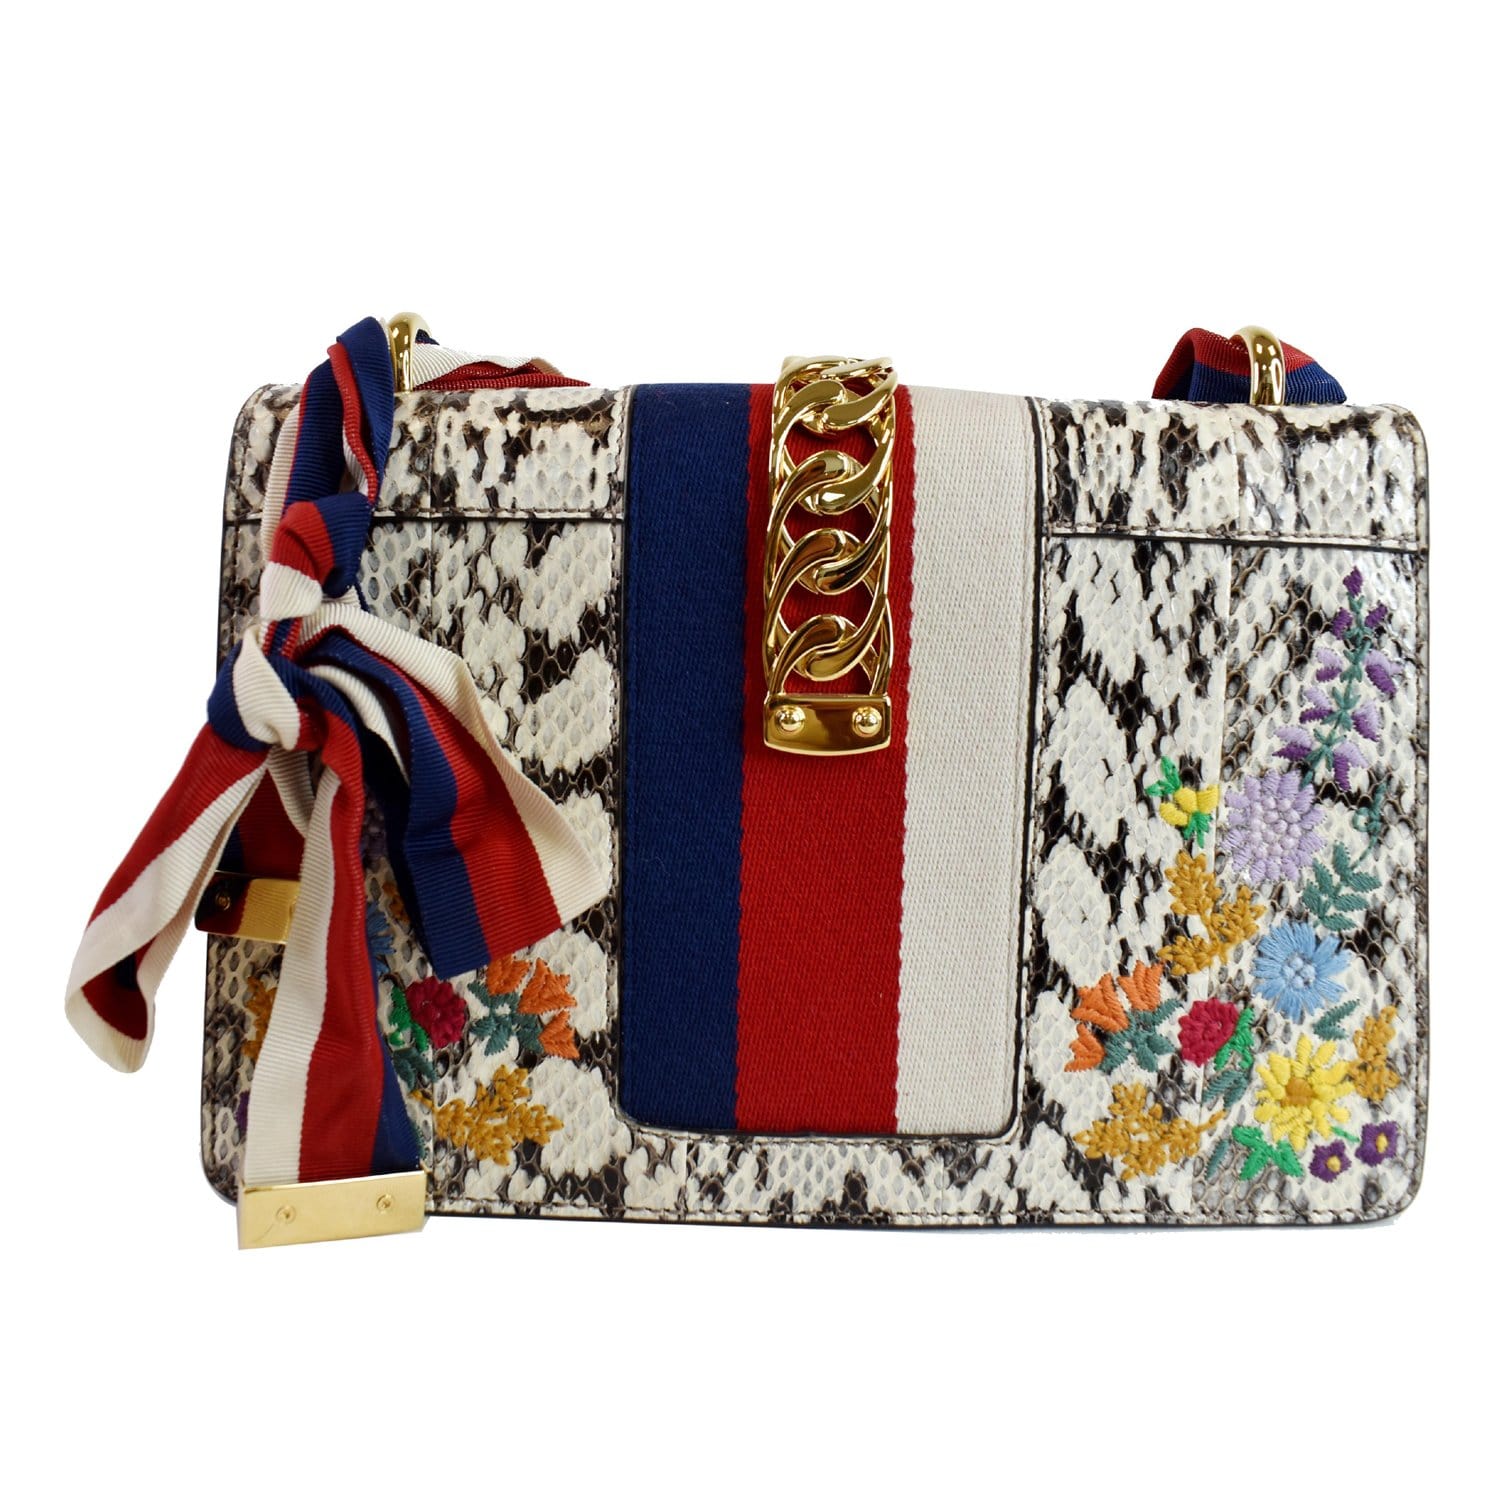 Gucci Small Sylvie Floral Embroidered Snakeskin Bag